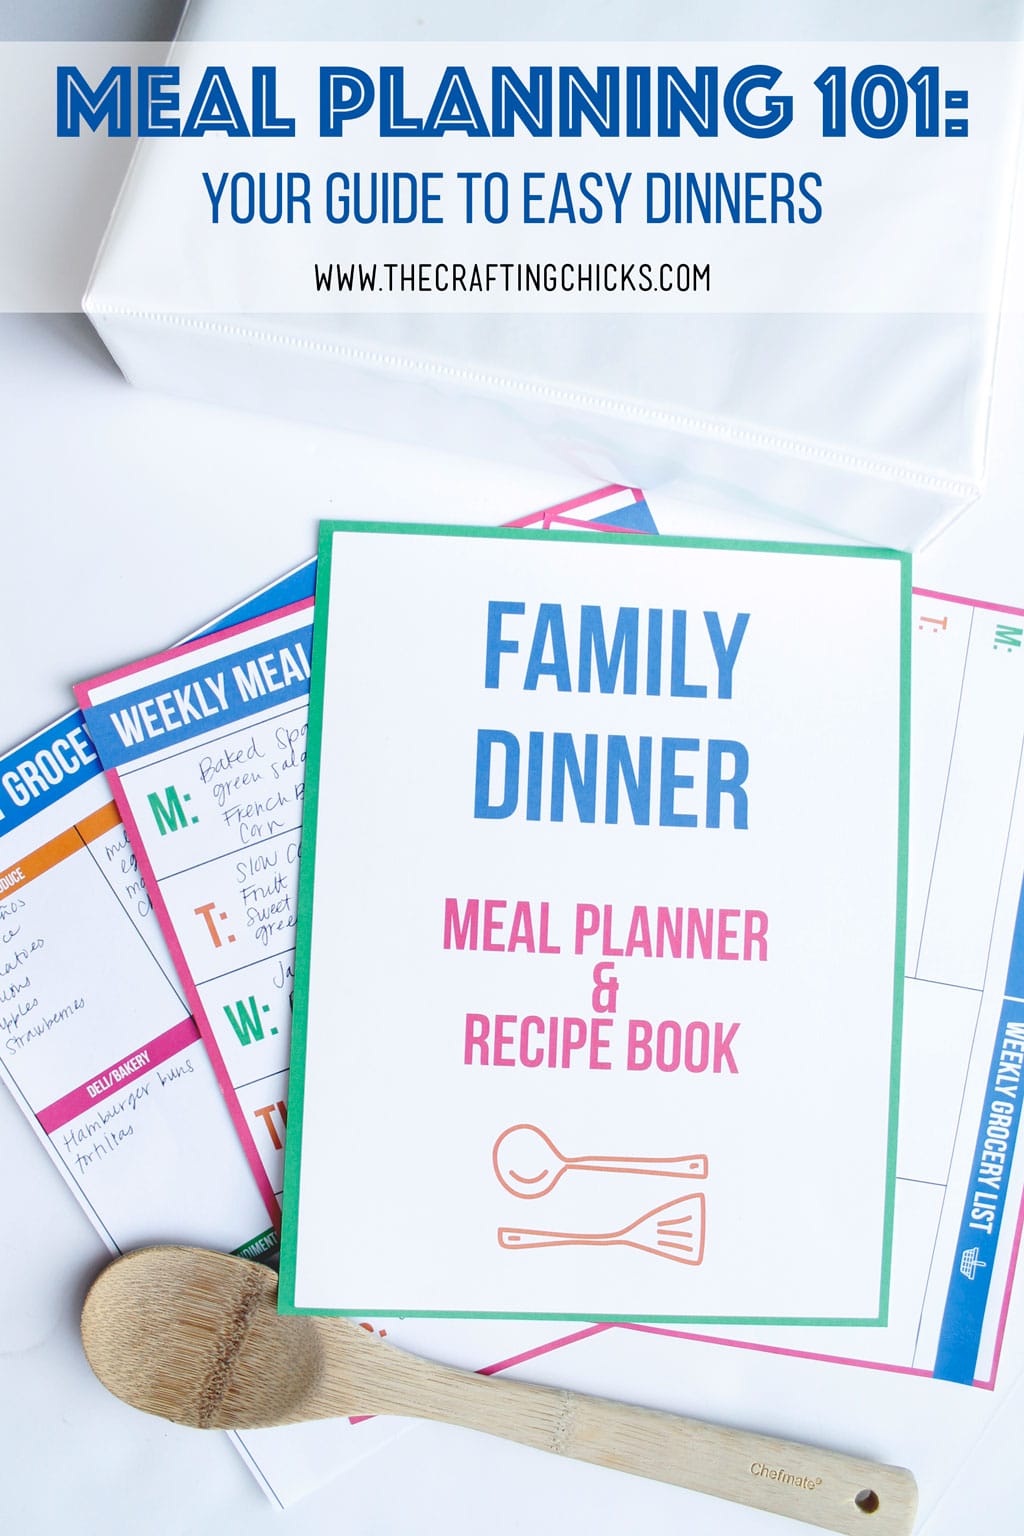 Meal Planning 101! We've got tips and ideas that will take your dinner time from stressful to done. Free printables included.